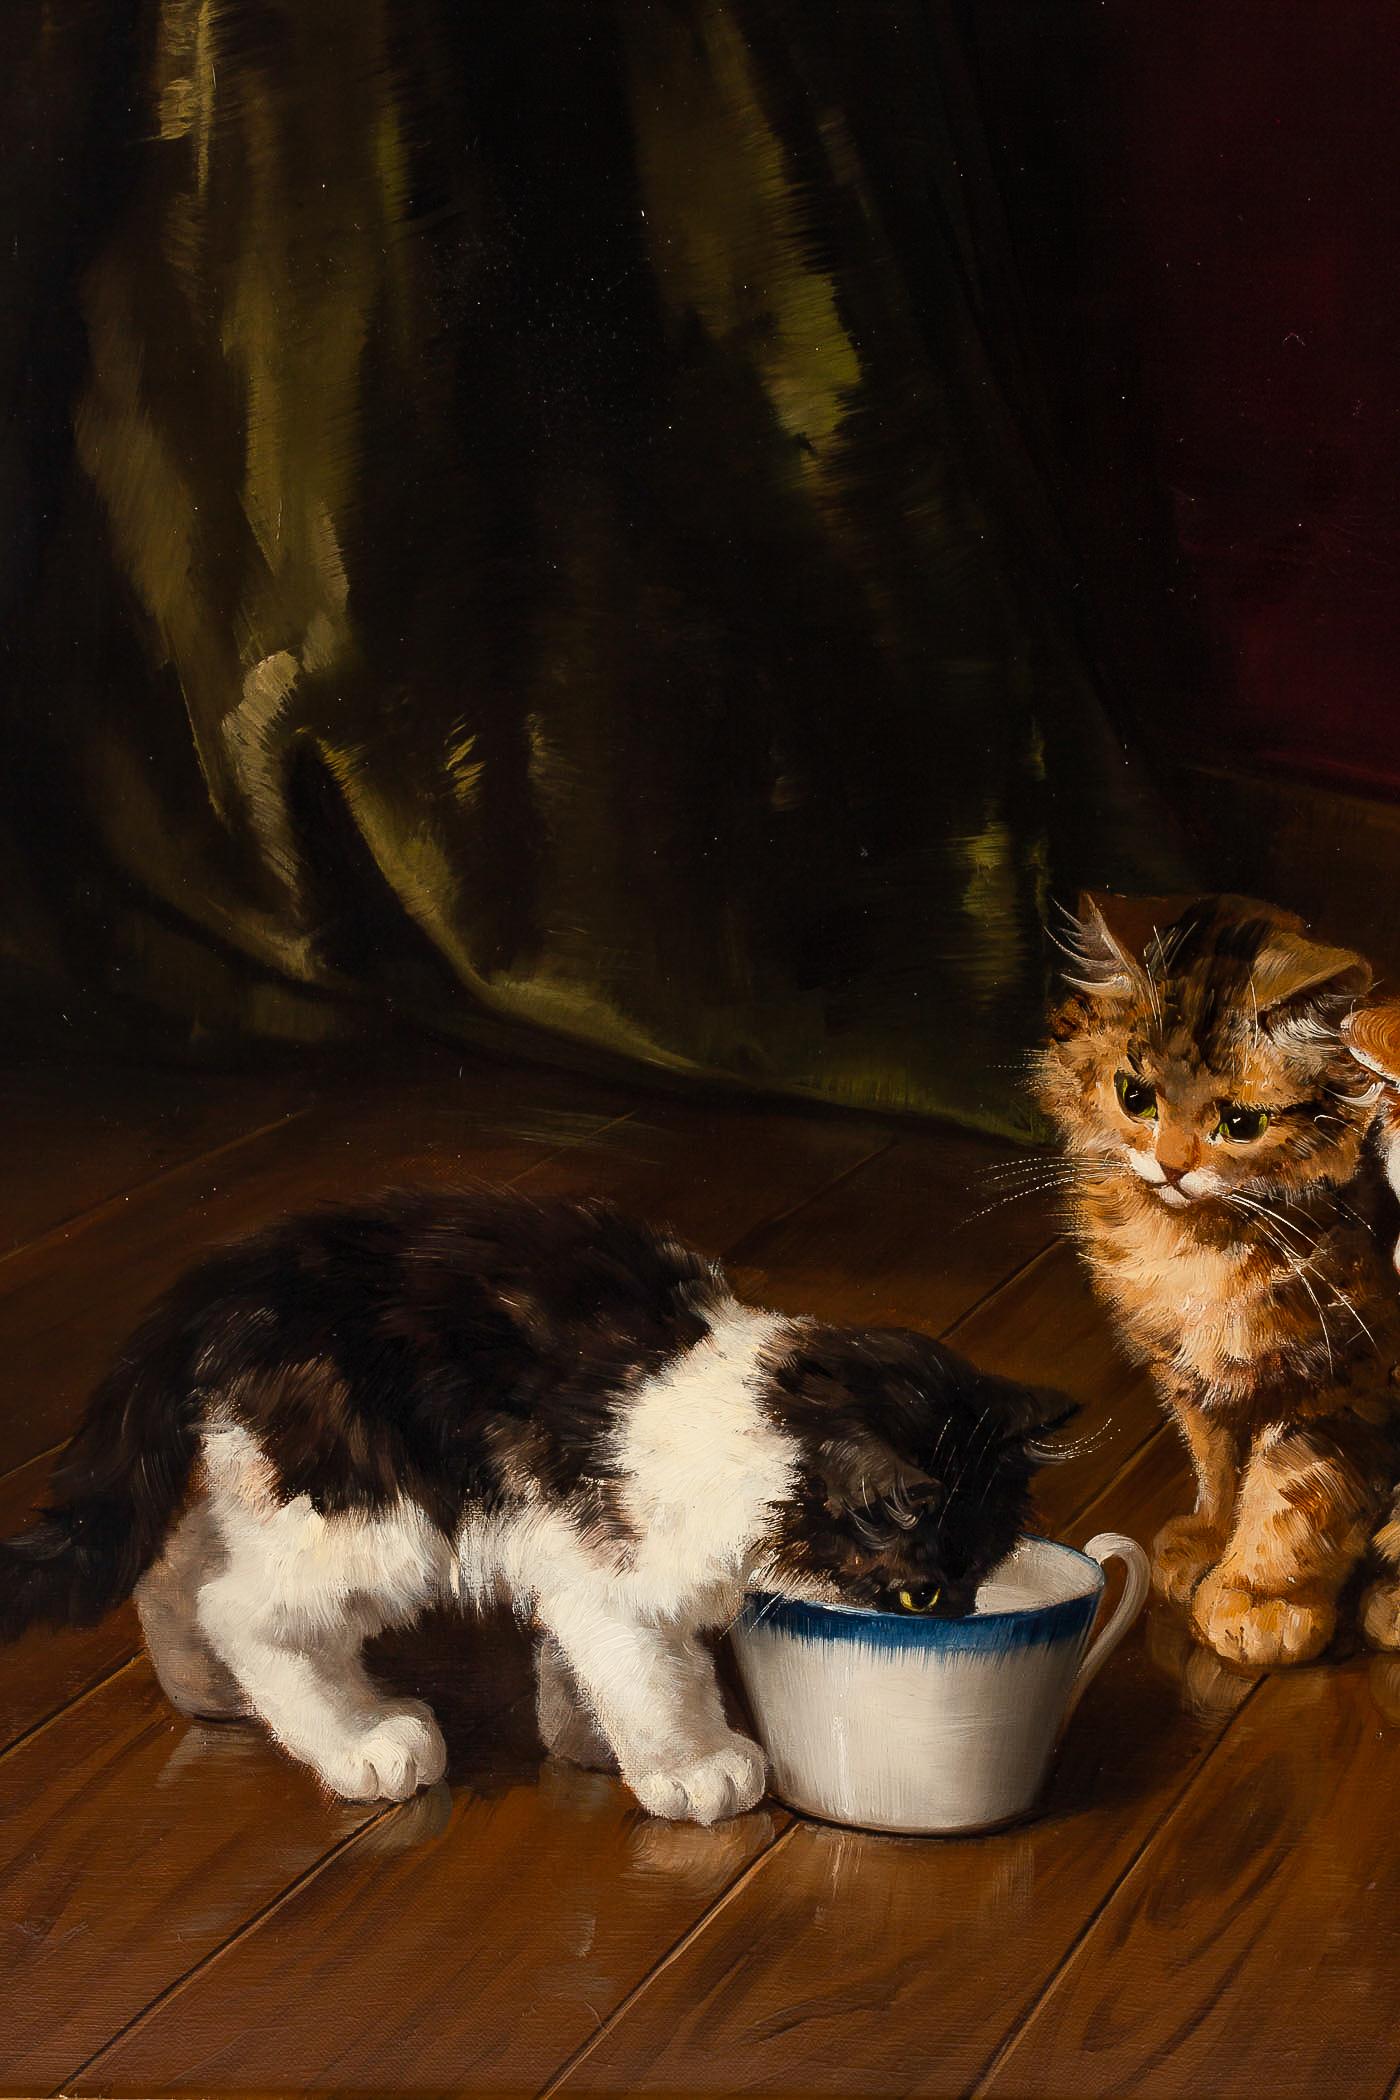 Painted Alfred Arthur Brunel de Neuville, Oil on Canvas, The Three Cats, circa 1880-1900